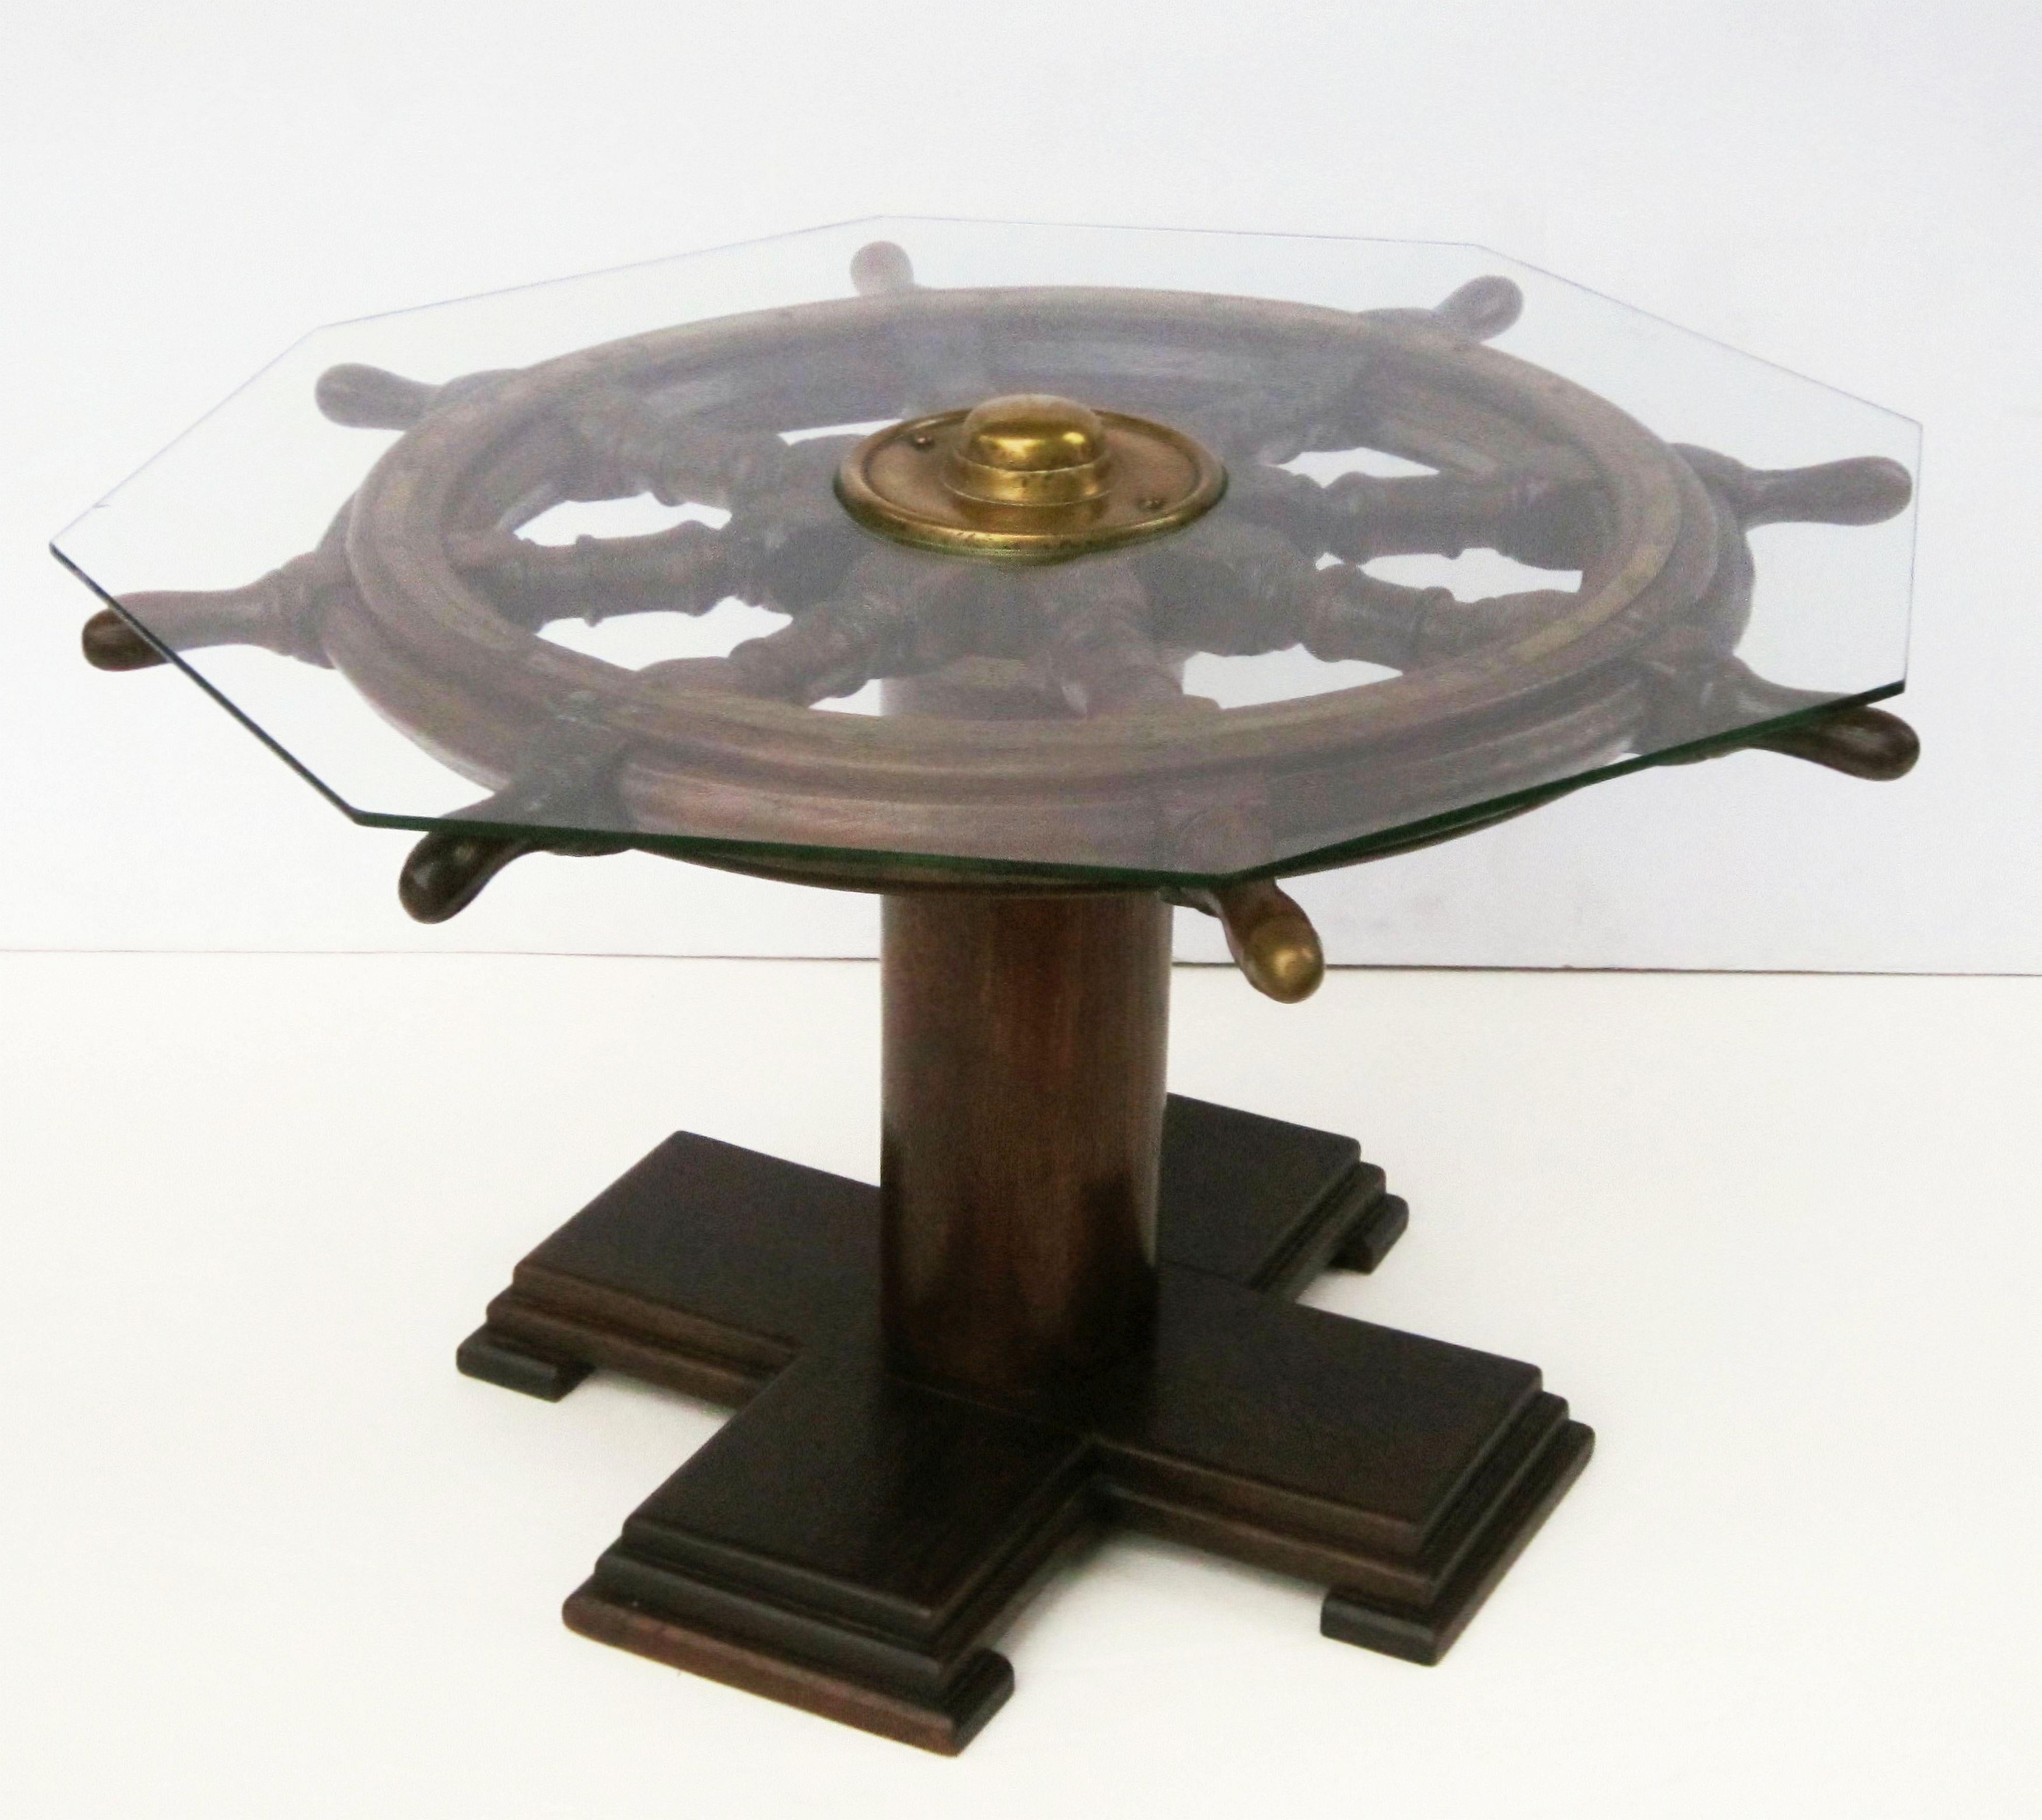 An English occasional or cocktail table fashioned from an authentic sailing ship's wheel of wood and brass, mounted to a wooden pedestal base, with removable eight-sided glass top.

Dimensions: Height 20 1/2 inches x width 36 inches x depth 36